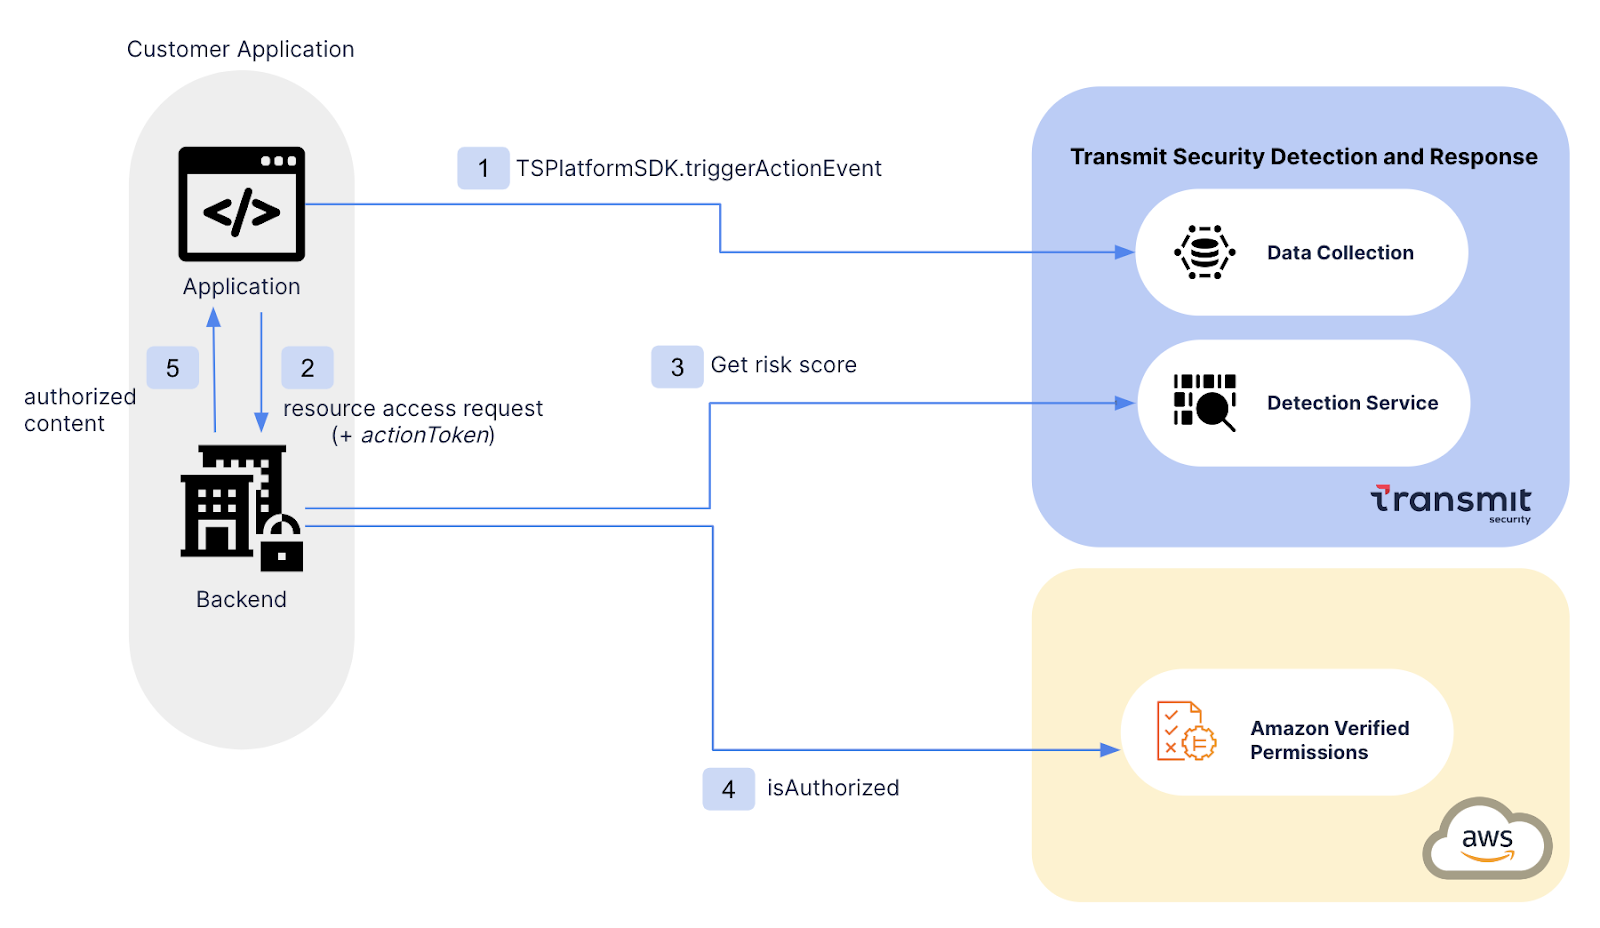 Transmit Security Detection and Response integration flow